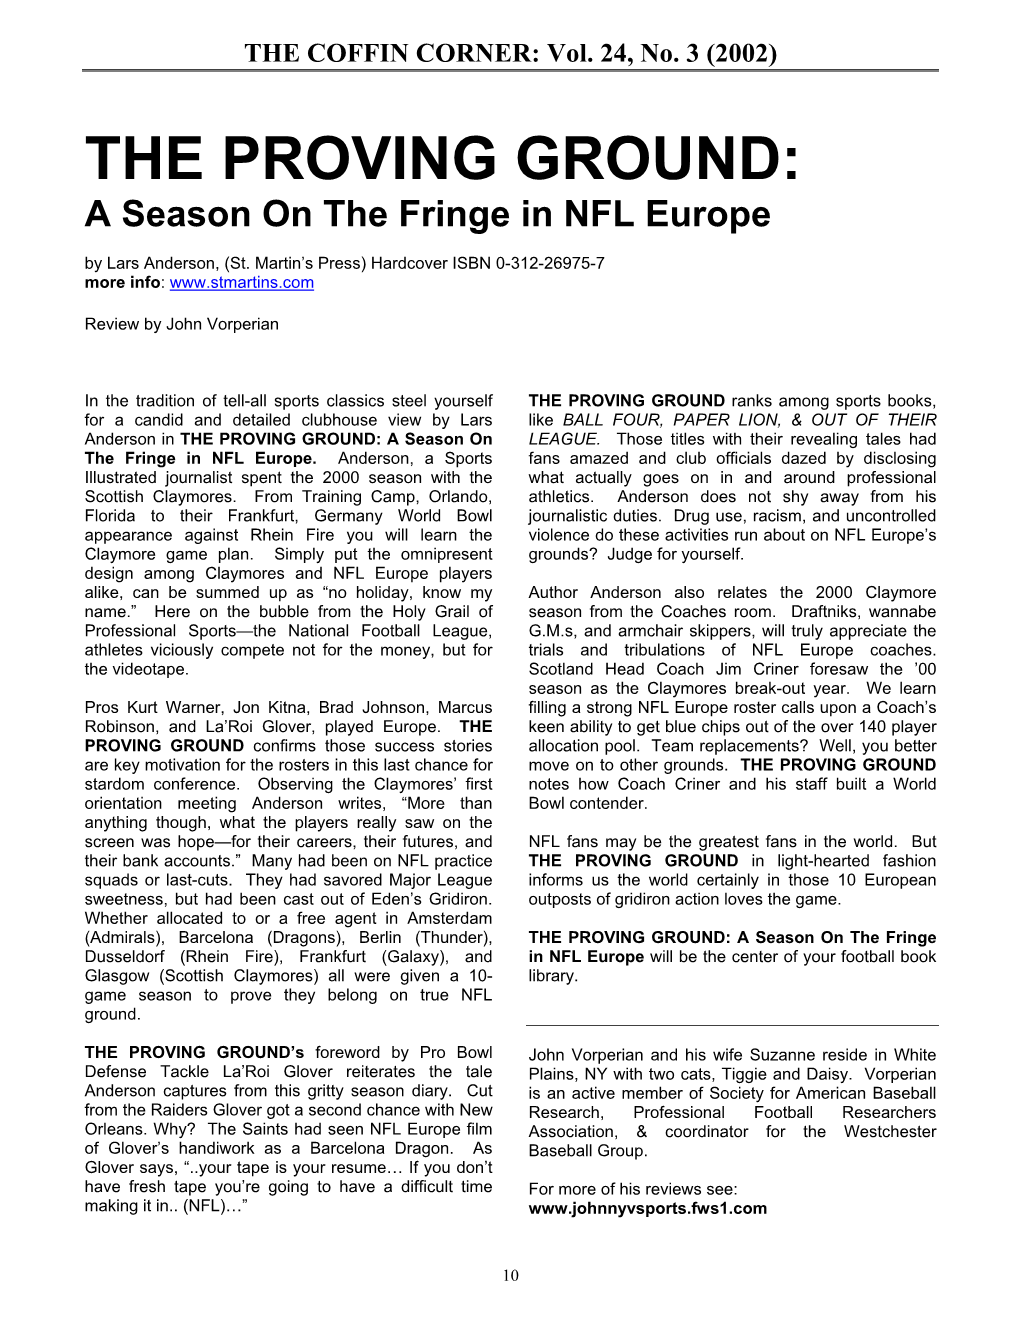 THE PROVING GROUND: a Season on the Fringe in NFL Europe by Lars Anderson, (St